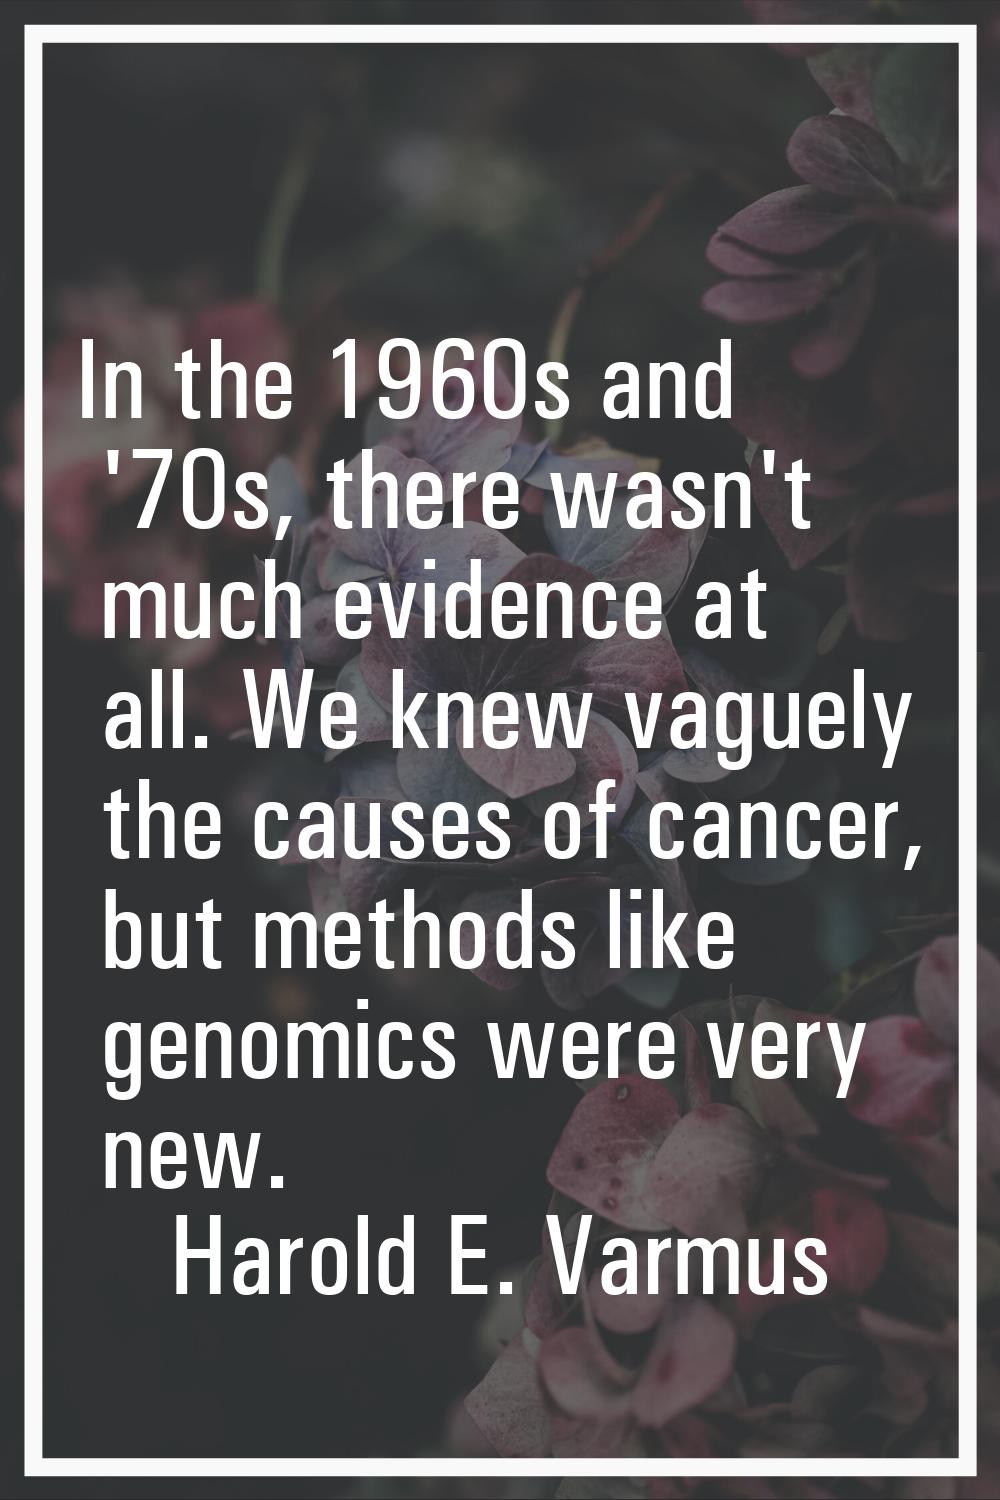 In the 1960s and '70s, there wasn't much evidence at all. We knew vaguely the causes of cancer, but